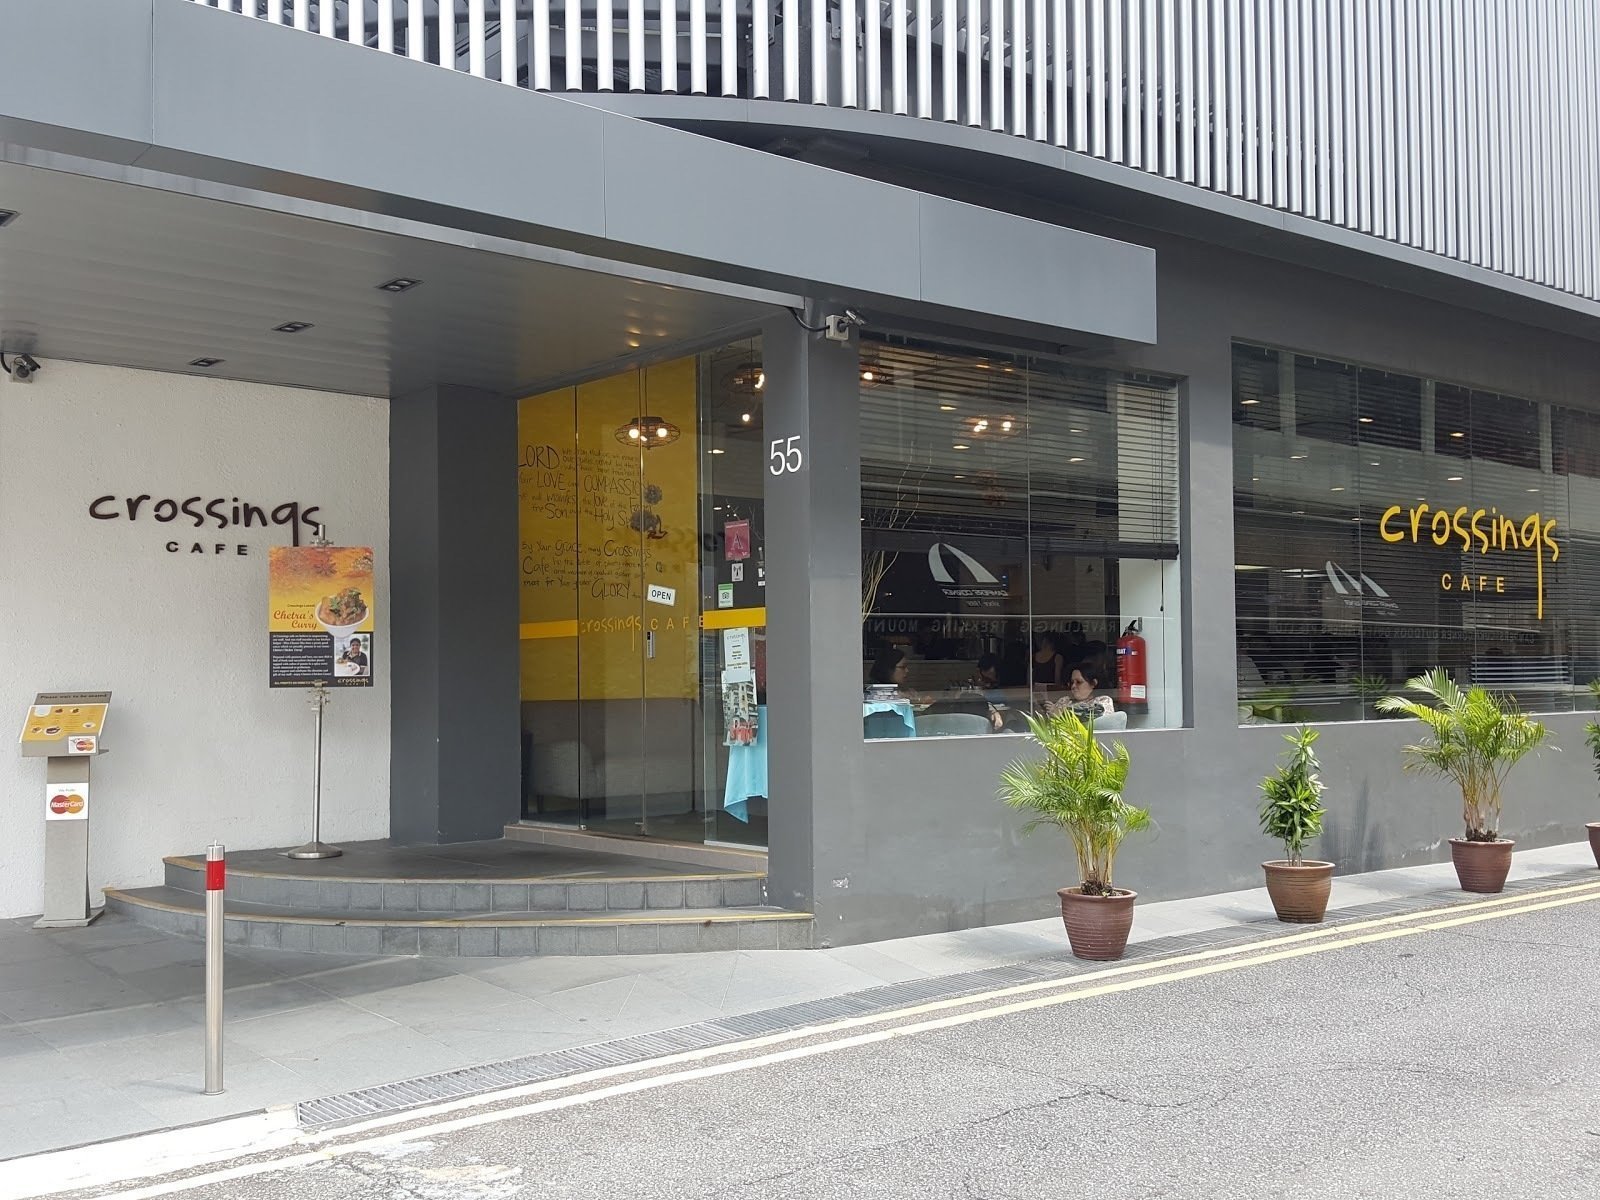 <span class="translation_missing" title="translation missing: en.meta.location_title, location_name: Crossings Cafe, city: Singapore">Location Title</span>